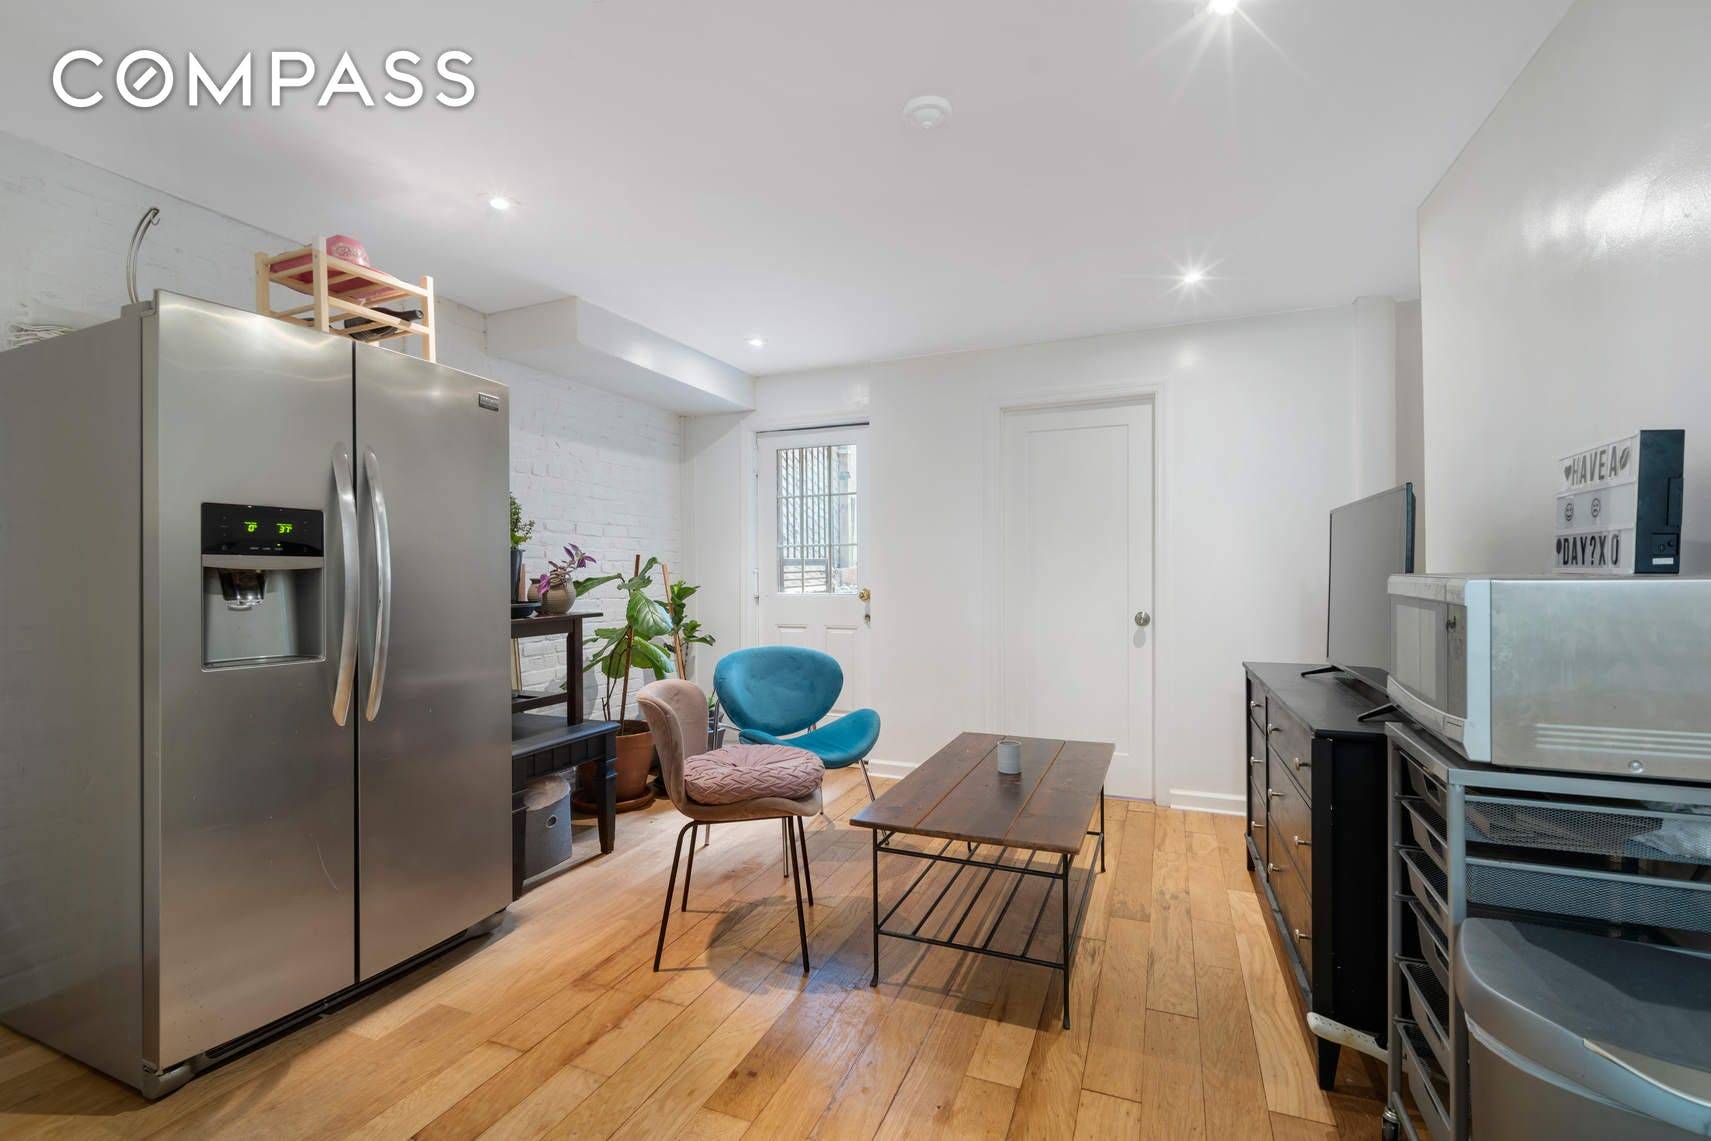 Situated at the nexus of Crown Heights, Prospect Heights, Bedford Stuyvesant, and Clinton Hill, 1253 Pacific is a compelling 4 family building boasting an established track record of rental success.